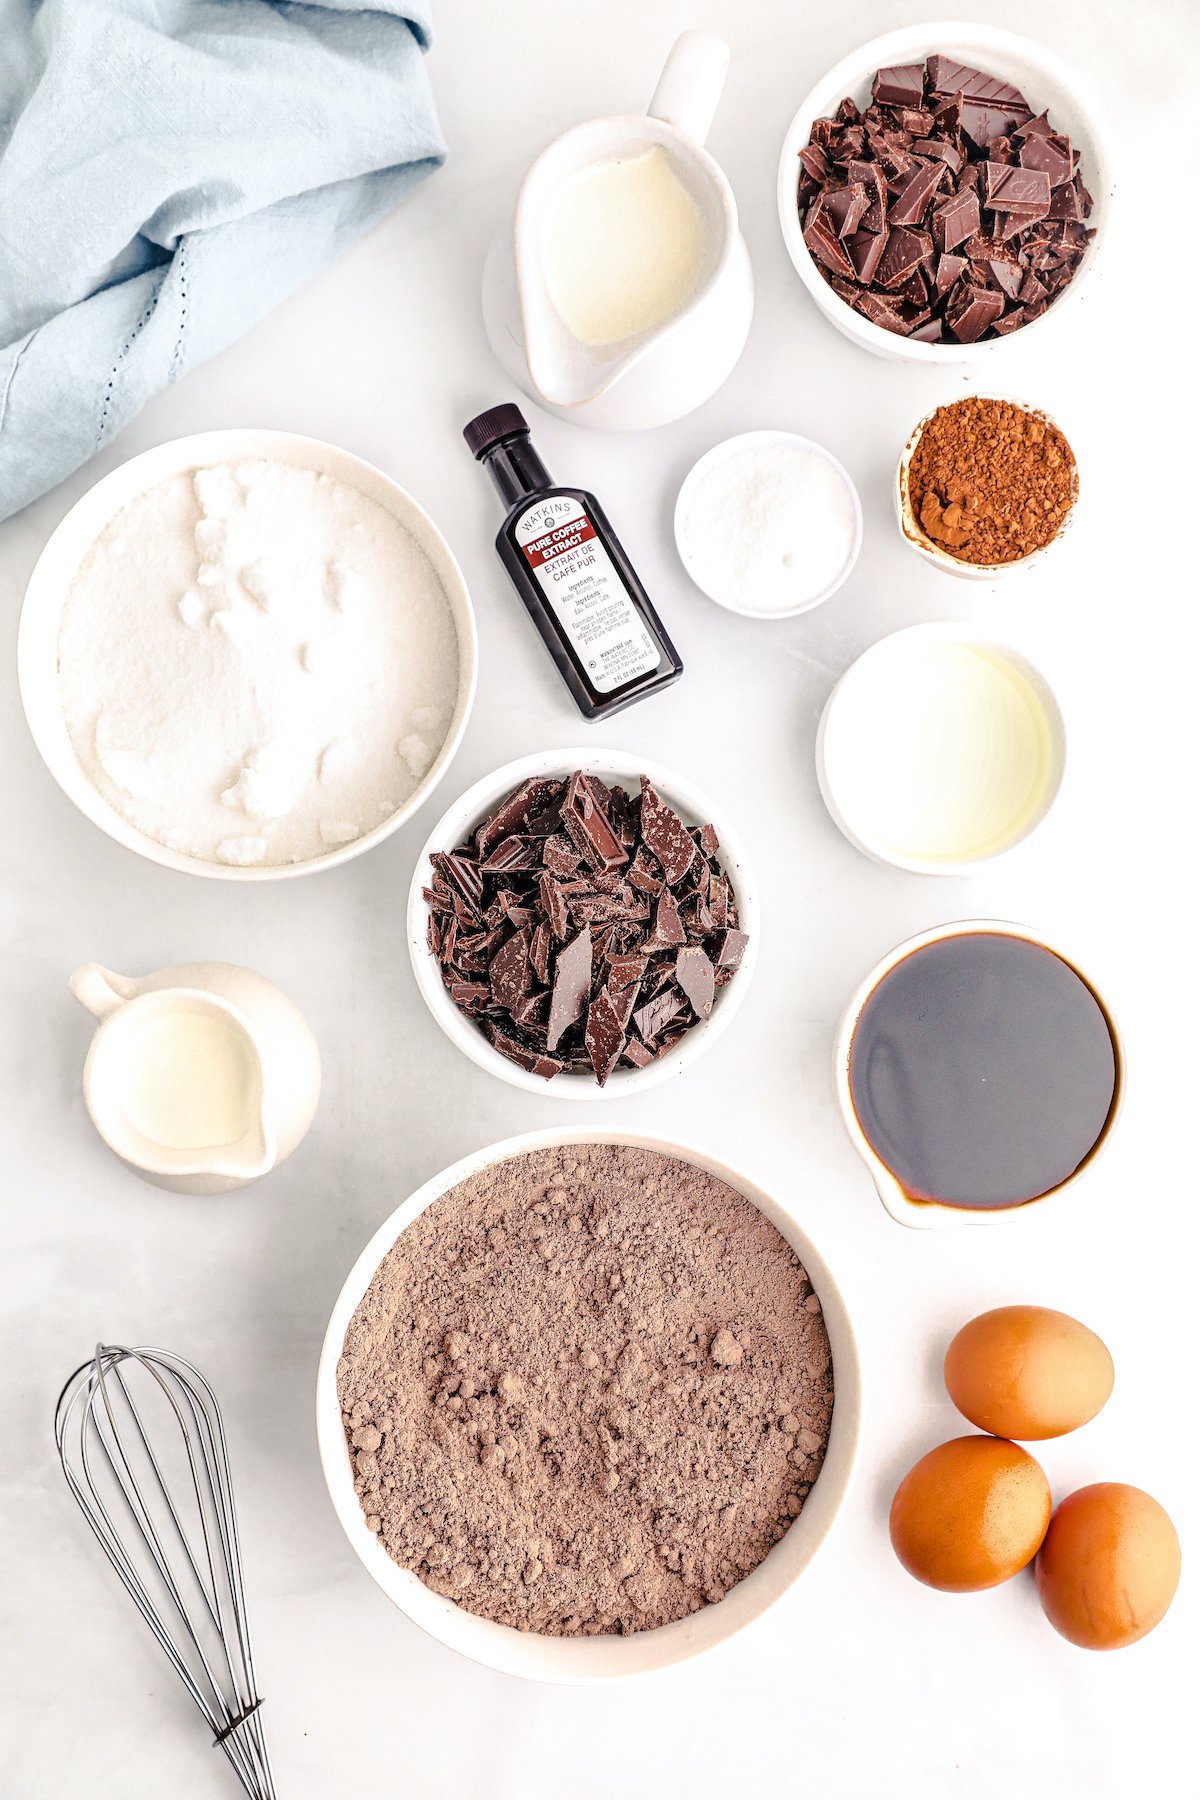 triple chocolate cupcake ingredients set out on a table